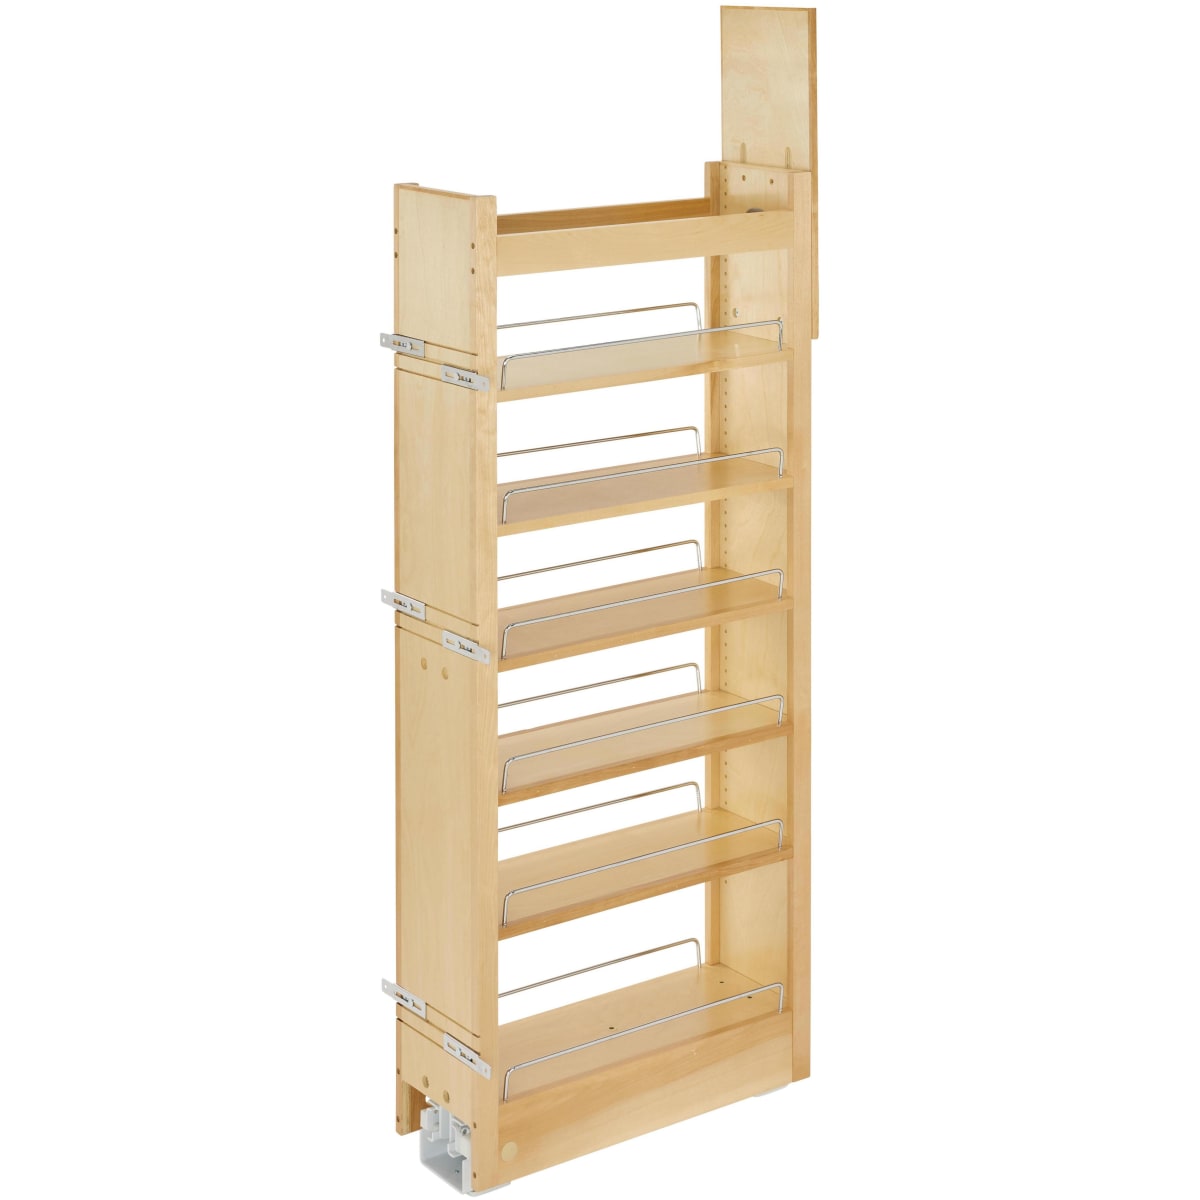 Rev-A-Shelf Inc 8 Wood Tall Cabinet Pullout Pantry Organizer with Soft-Close 51 Tall Rev-A-Shelf 448-TPF51-8-1 by